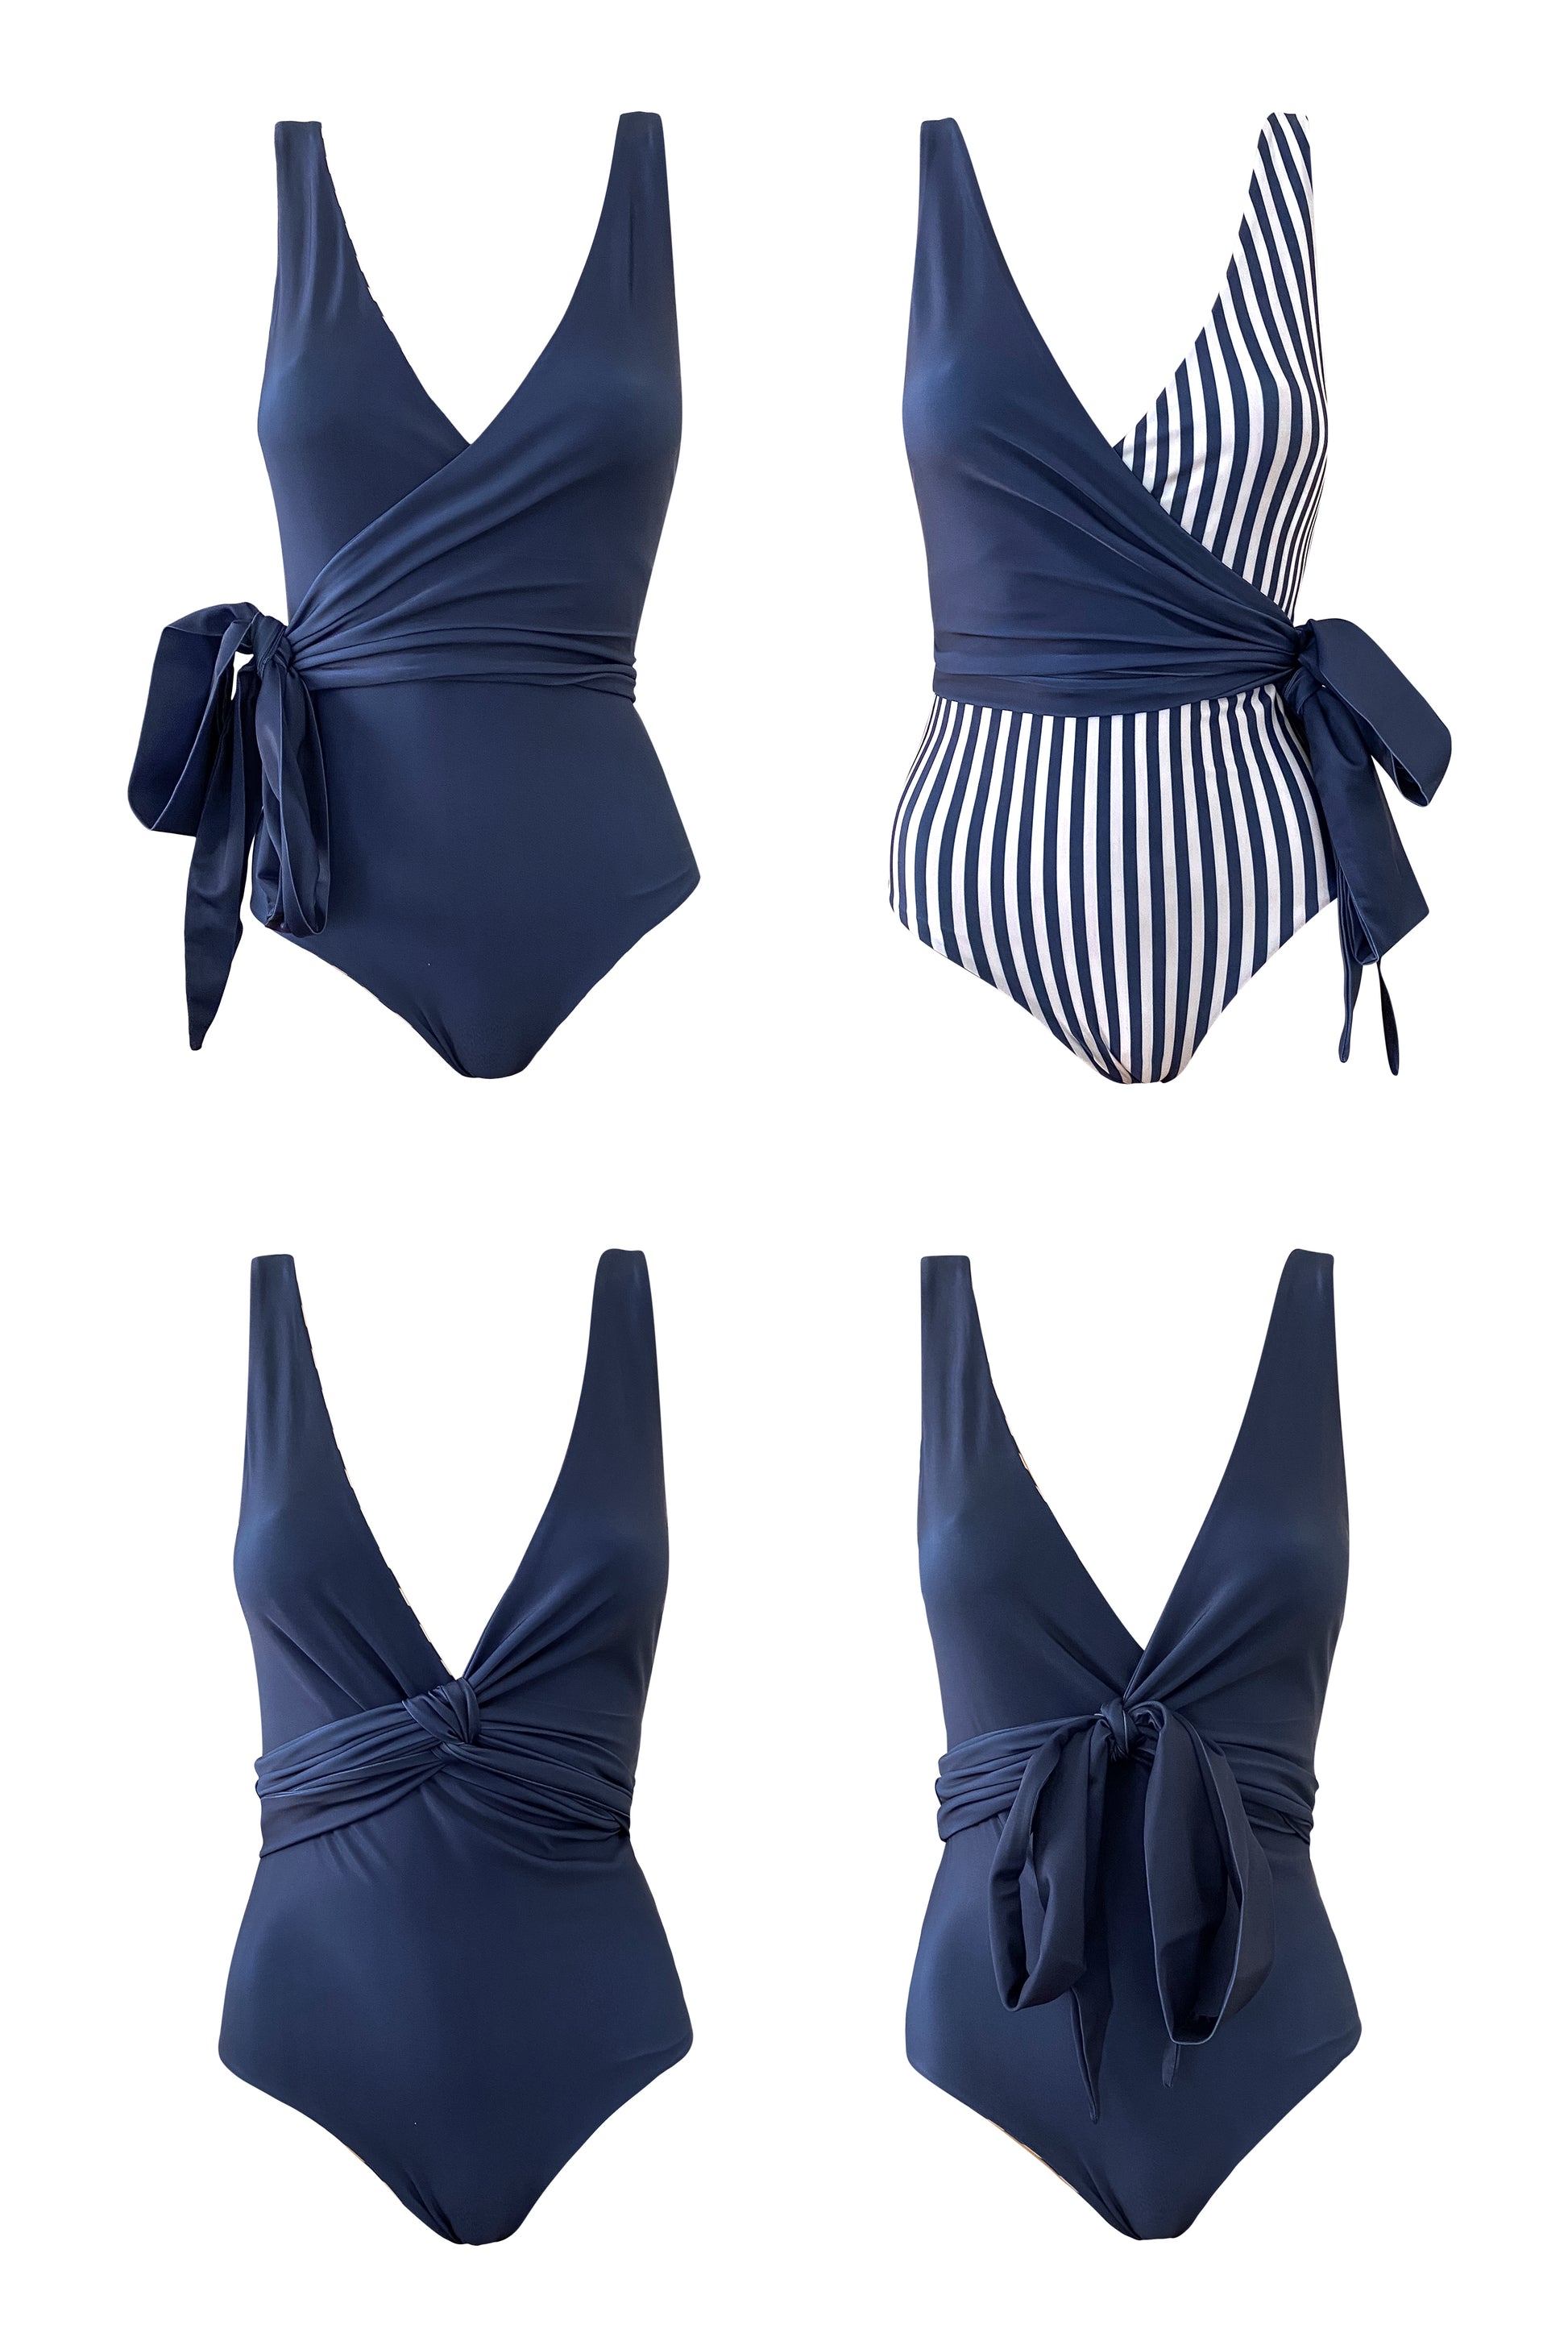 example of how to wear the swimsuit multiple ways